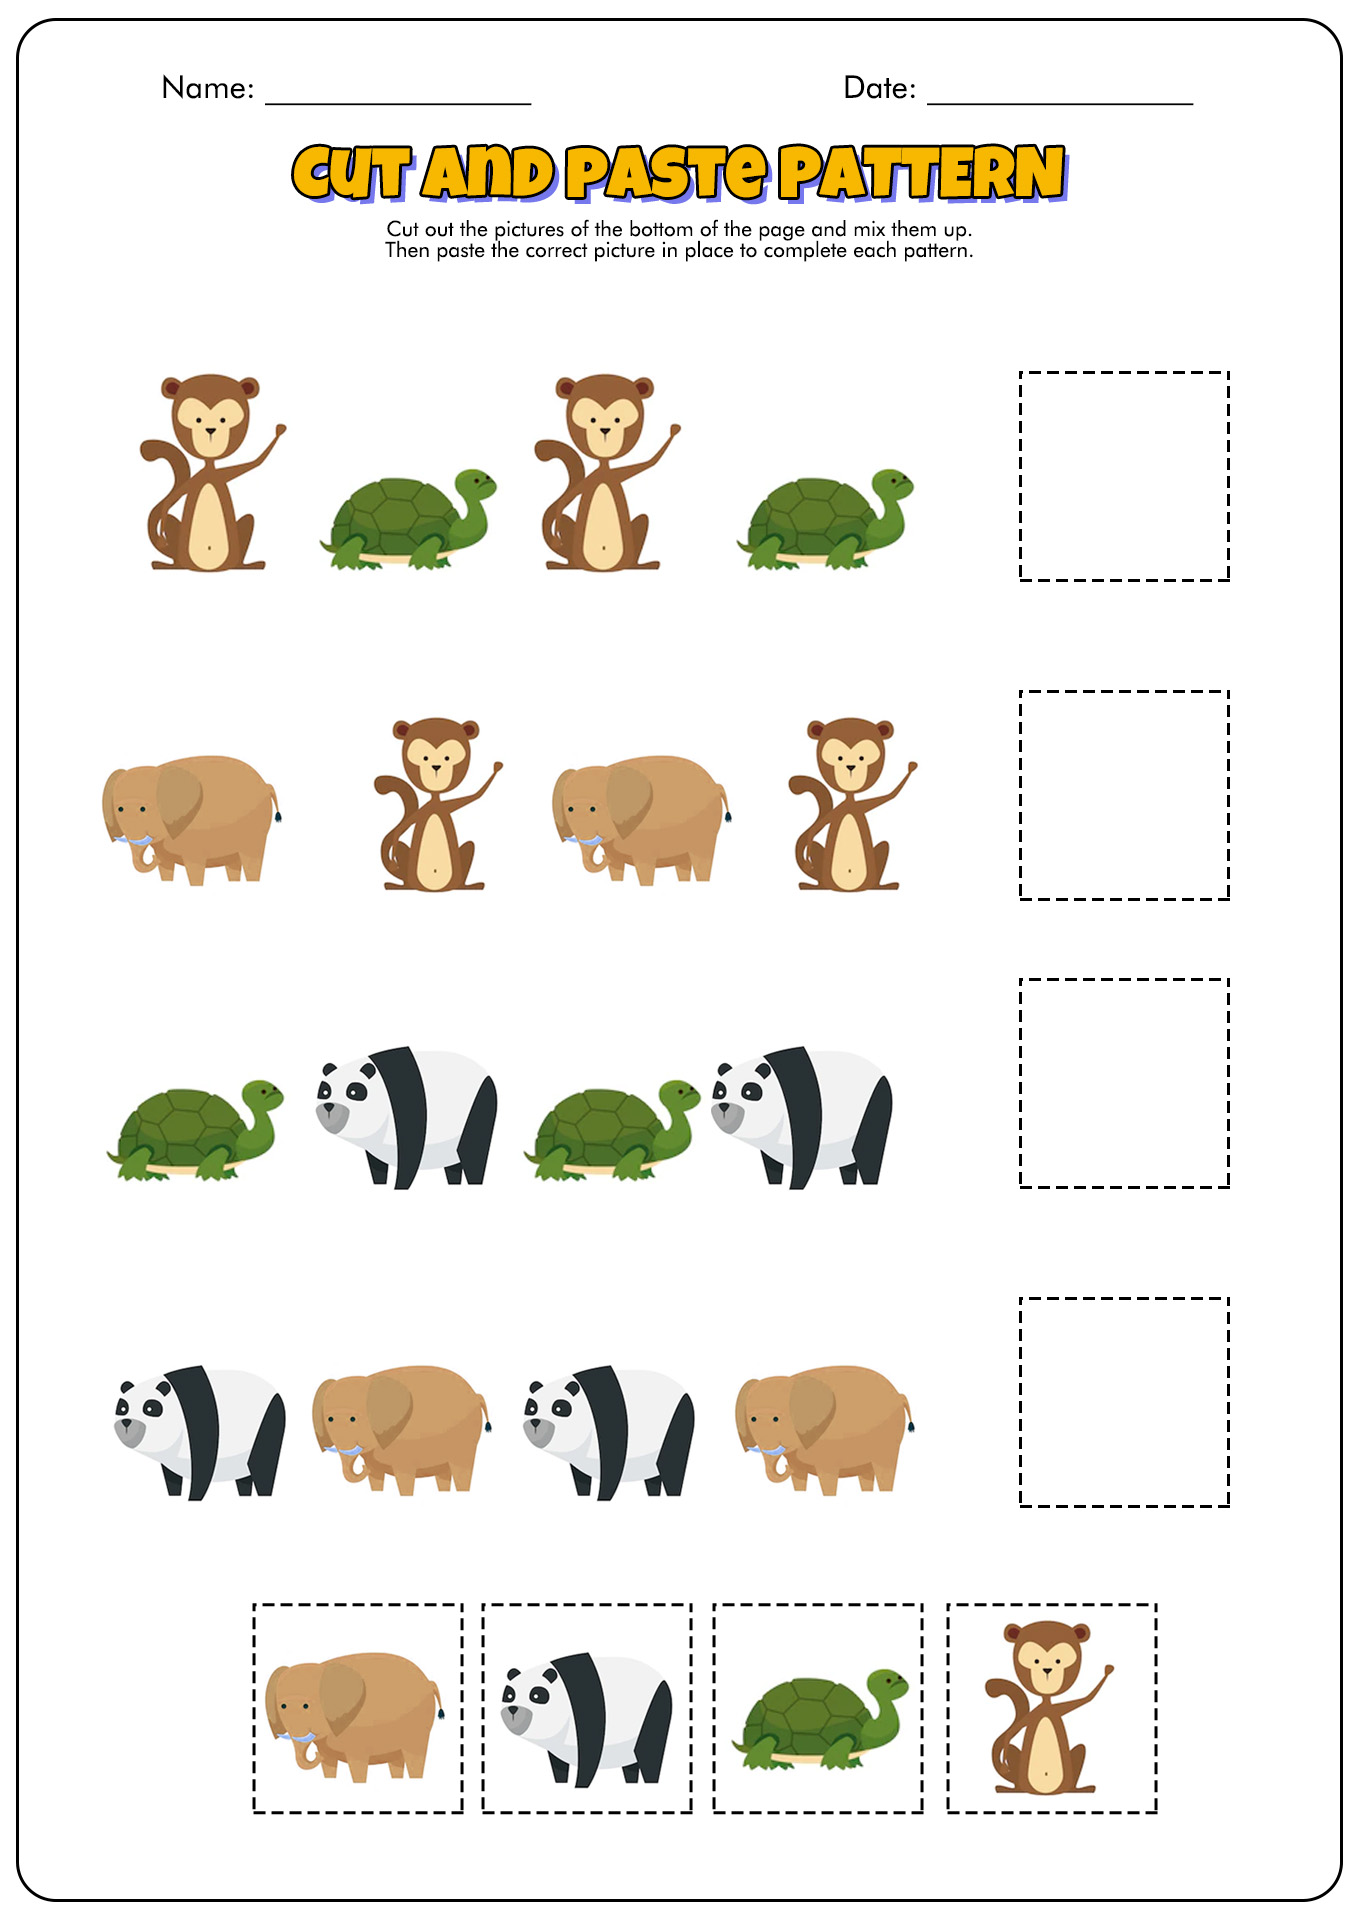 Cut and Paste Pattern Activities